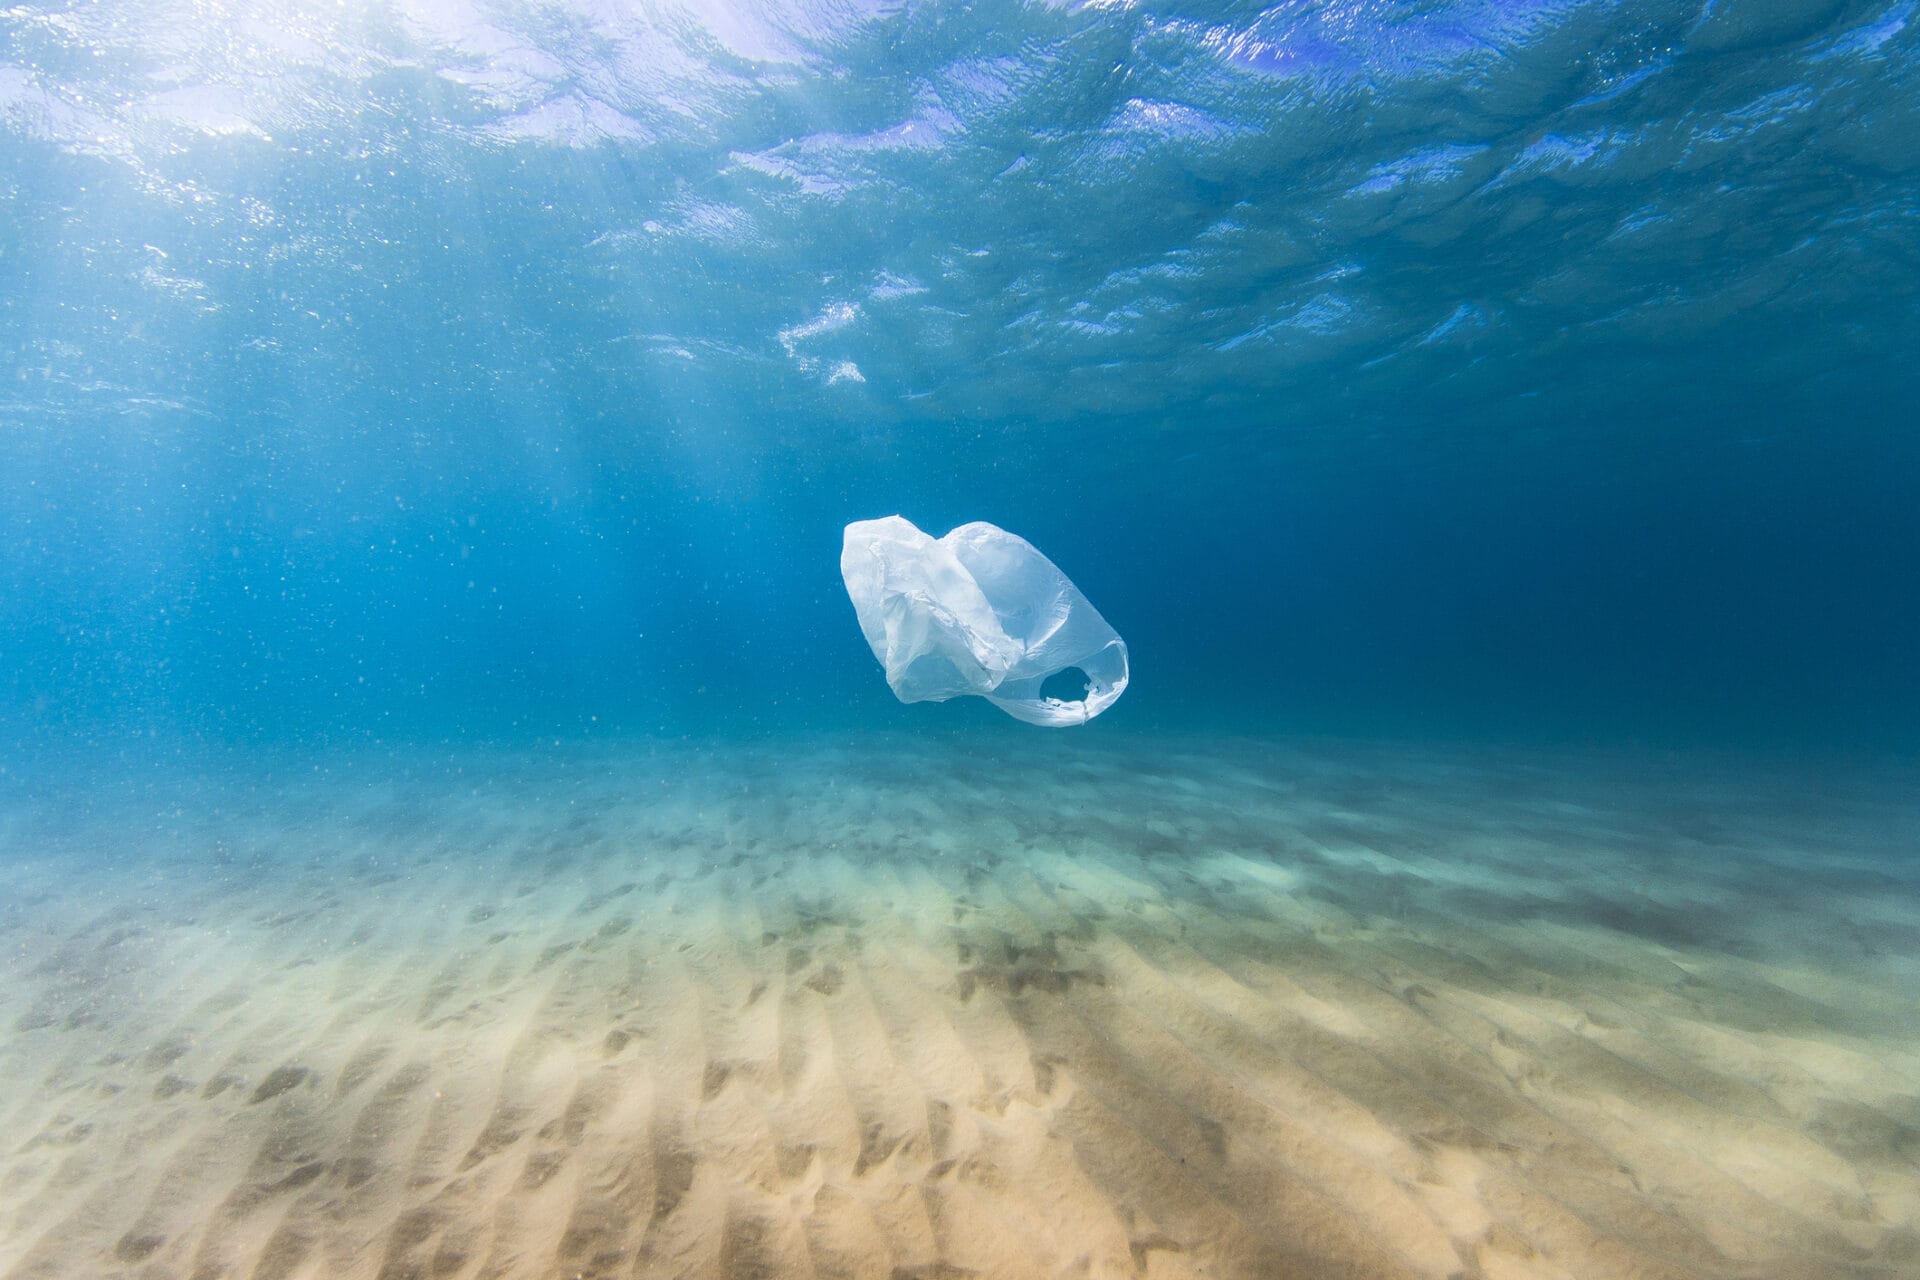 A plastic bag drifts in the clear blue ocean as a result of human pollution. Perfect for ocean conservation theme. (This bag was collected and taken out of the ocean)